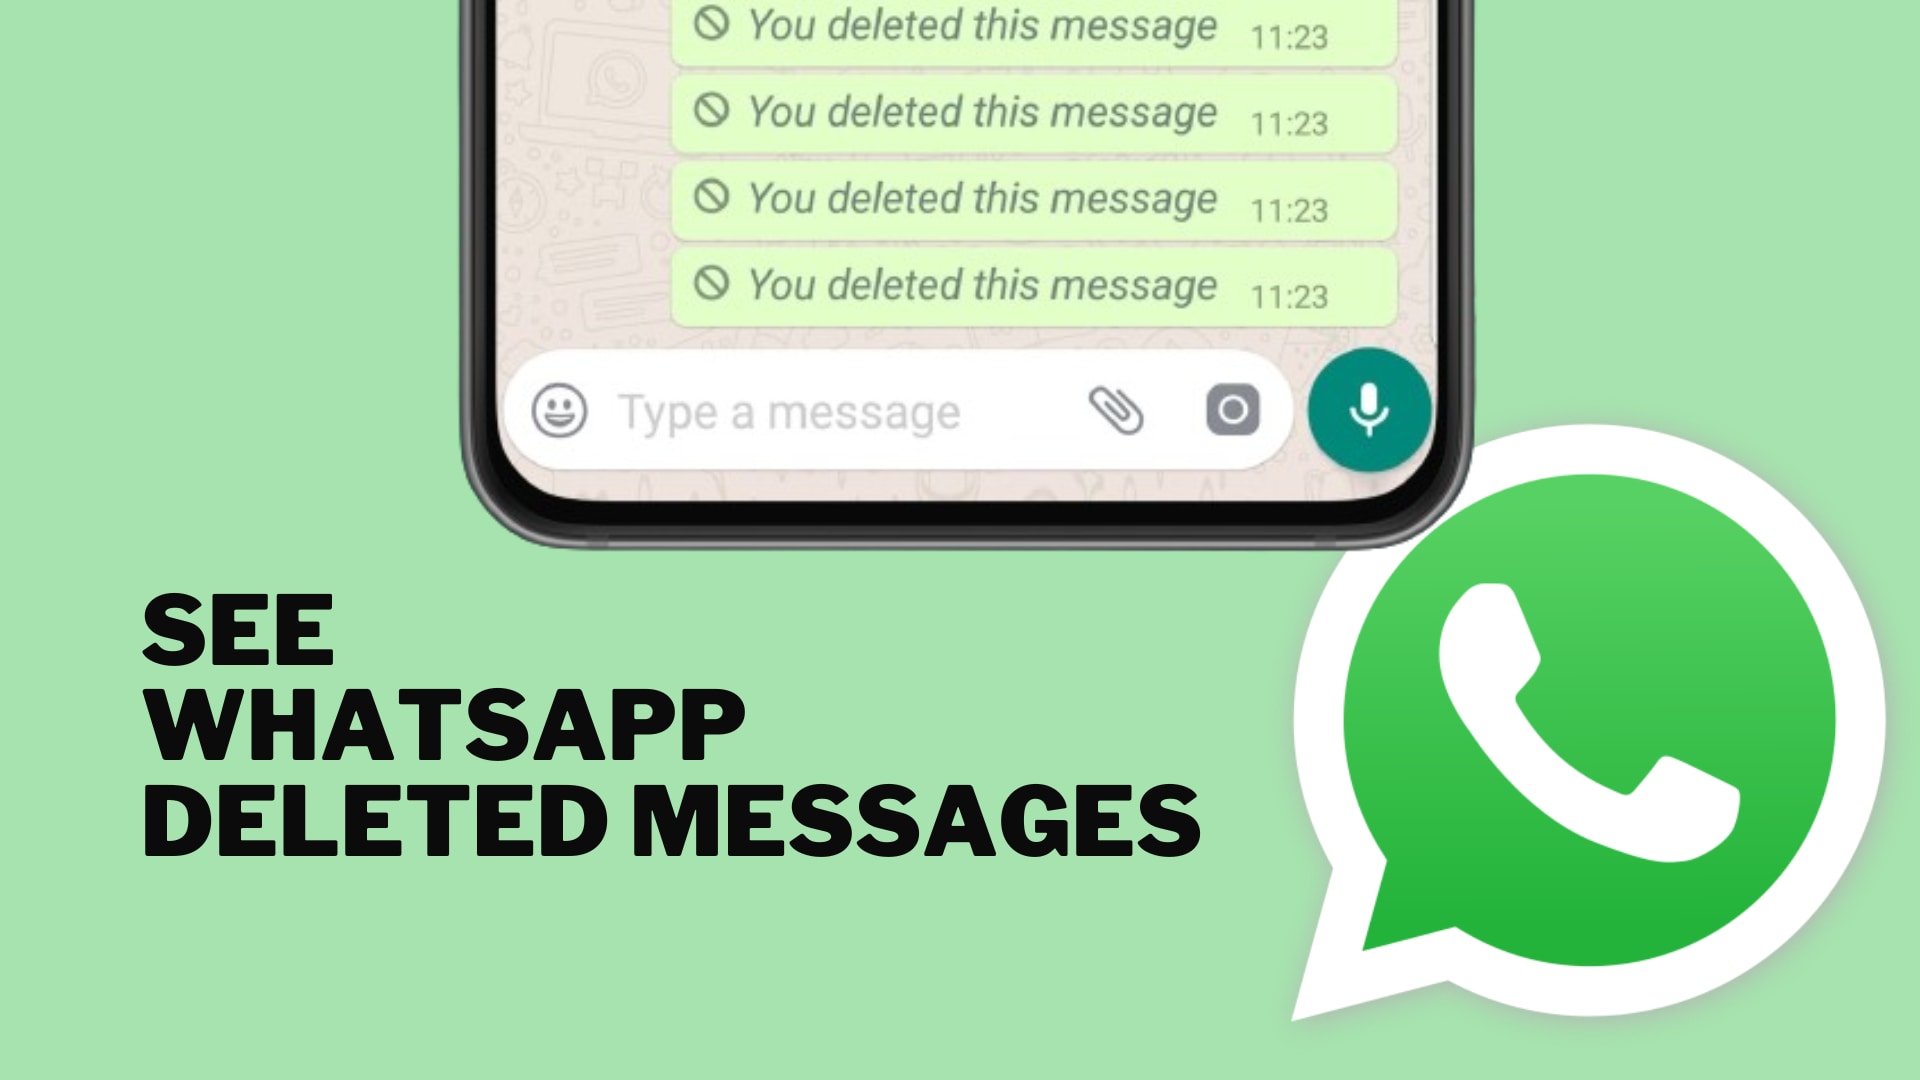 See WhatsApp deleted messages.